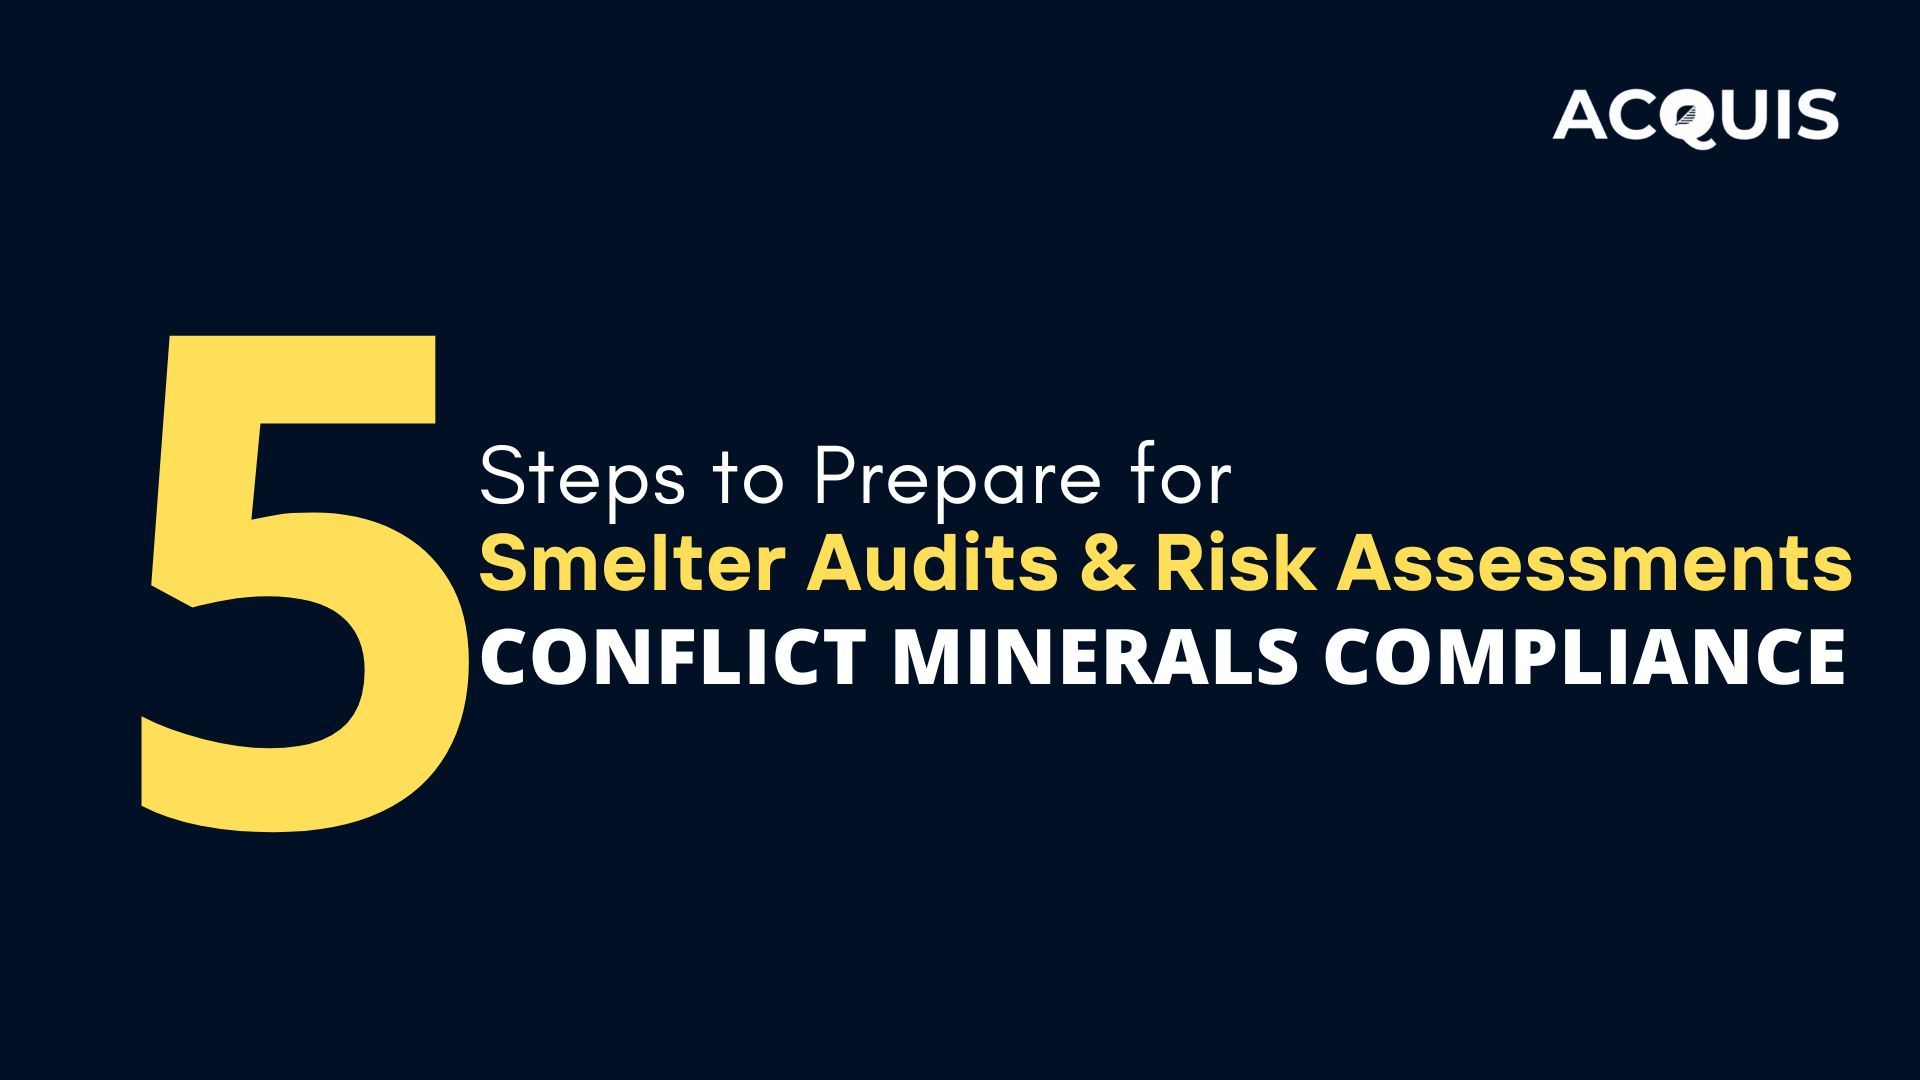 5 Steps to Prepare Smelter Audits & Risk Assessments for Conflict Minerals Compliance